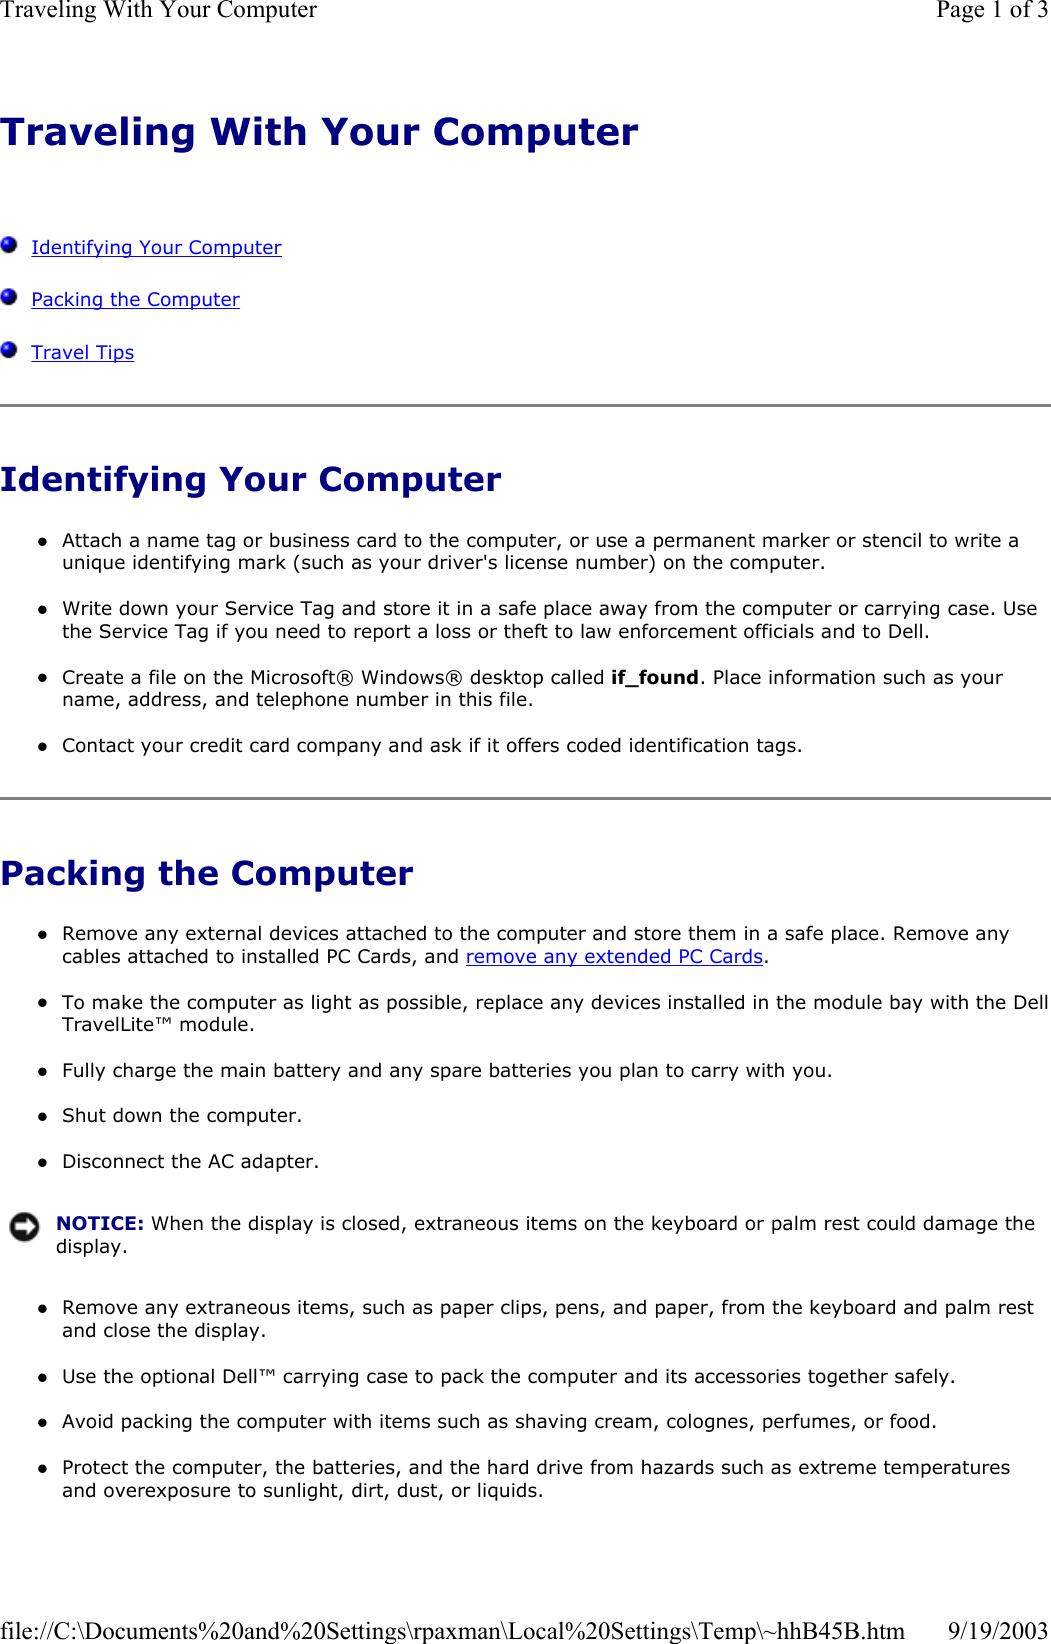 Traveling With Your Computer      Identifying Your Computer   Packing the Computer   Travel Tips Identifying Your Computer zAttach a name tag or business card to the computer, or use a permanent marker or stencil to write a unique identifying mark (such as your driver&apos;s license number) on the computer.  zWrite down your Service Tag and store it in a safe place away from the computer or carrying case. Use the Service Tag if you need to report a loss or theft to law enforcement officials and to Dell.  zCreate a file on the Microsoft® Windows® desktop called if_found. Place information such as your name, address, and telephone number in this file.  zContact your credit card company and ask if it offers coded identification tags.  Packing the Computer zRemove any external devices attached to the computer and store them in a safe place. Remove any cables attached to installed PC Cards, and remove any extended PC Cards.  zTo make the computer as light as possible, replace any devices installed in the module bay with the DellTravelLite™ module.  zFully charge the main battery and any spare batteries you plan to carry with you.  zShut down the computer.  zDisconnect the AC adapter.  zRemove any extraneous items, such as paper clips, pens, and paper, from the keyboard and palm rest and close the display.  zUse the optional Dell™ carrying case to pack the computer and its accessories together safely.  zAvoid packing the computer with items such as shaving cream, colognes, perfumes, or food.  zProtect the computer, the batteries, and the hard drive from hazards such as extreme temperatures and overexposure to sunlight, dirt, dust, or liquids.  NOTICE: When the display is closed, extraneous items on the keyboard or palm rest could damage the display.Page 1 of 3Traveling With Your Computer9/19/2003file://C:\Documents%20and%20Settings\rpaxman\Local%20Settings\Temp\~hhB45B.htm